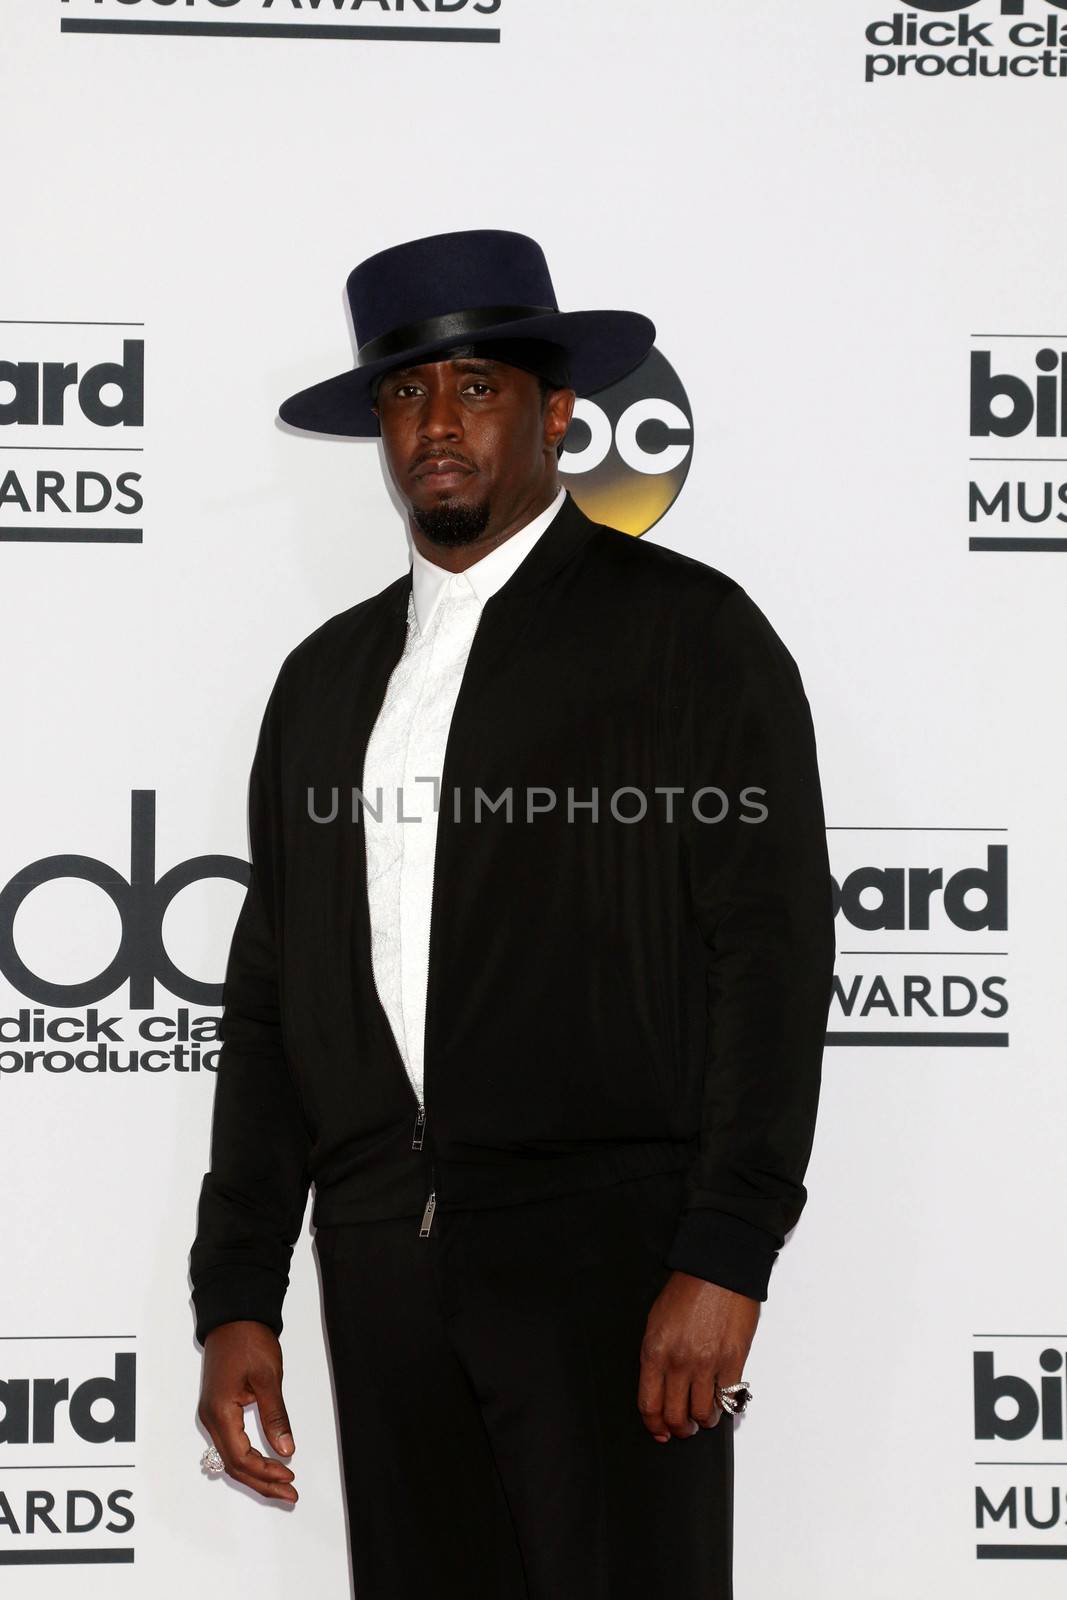 Sean Combs
at the 2017 Billboard Awards Press Room, T-Mobile Arena, Las Vegas, NV 05-21-17/ImageCollect by ImageCollect